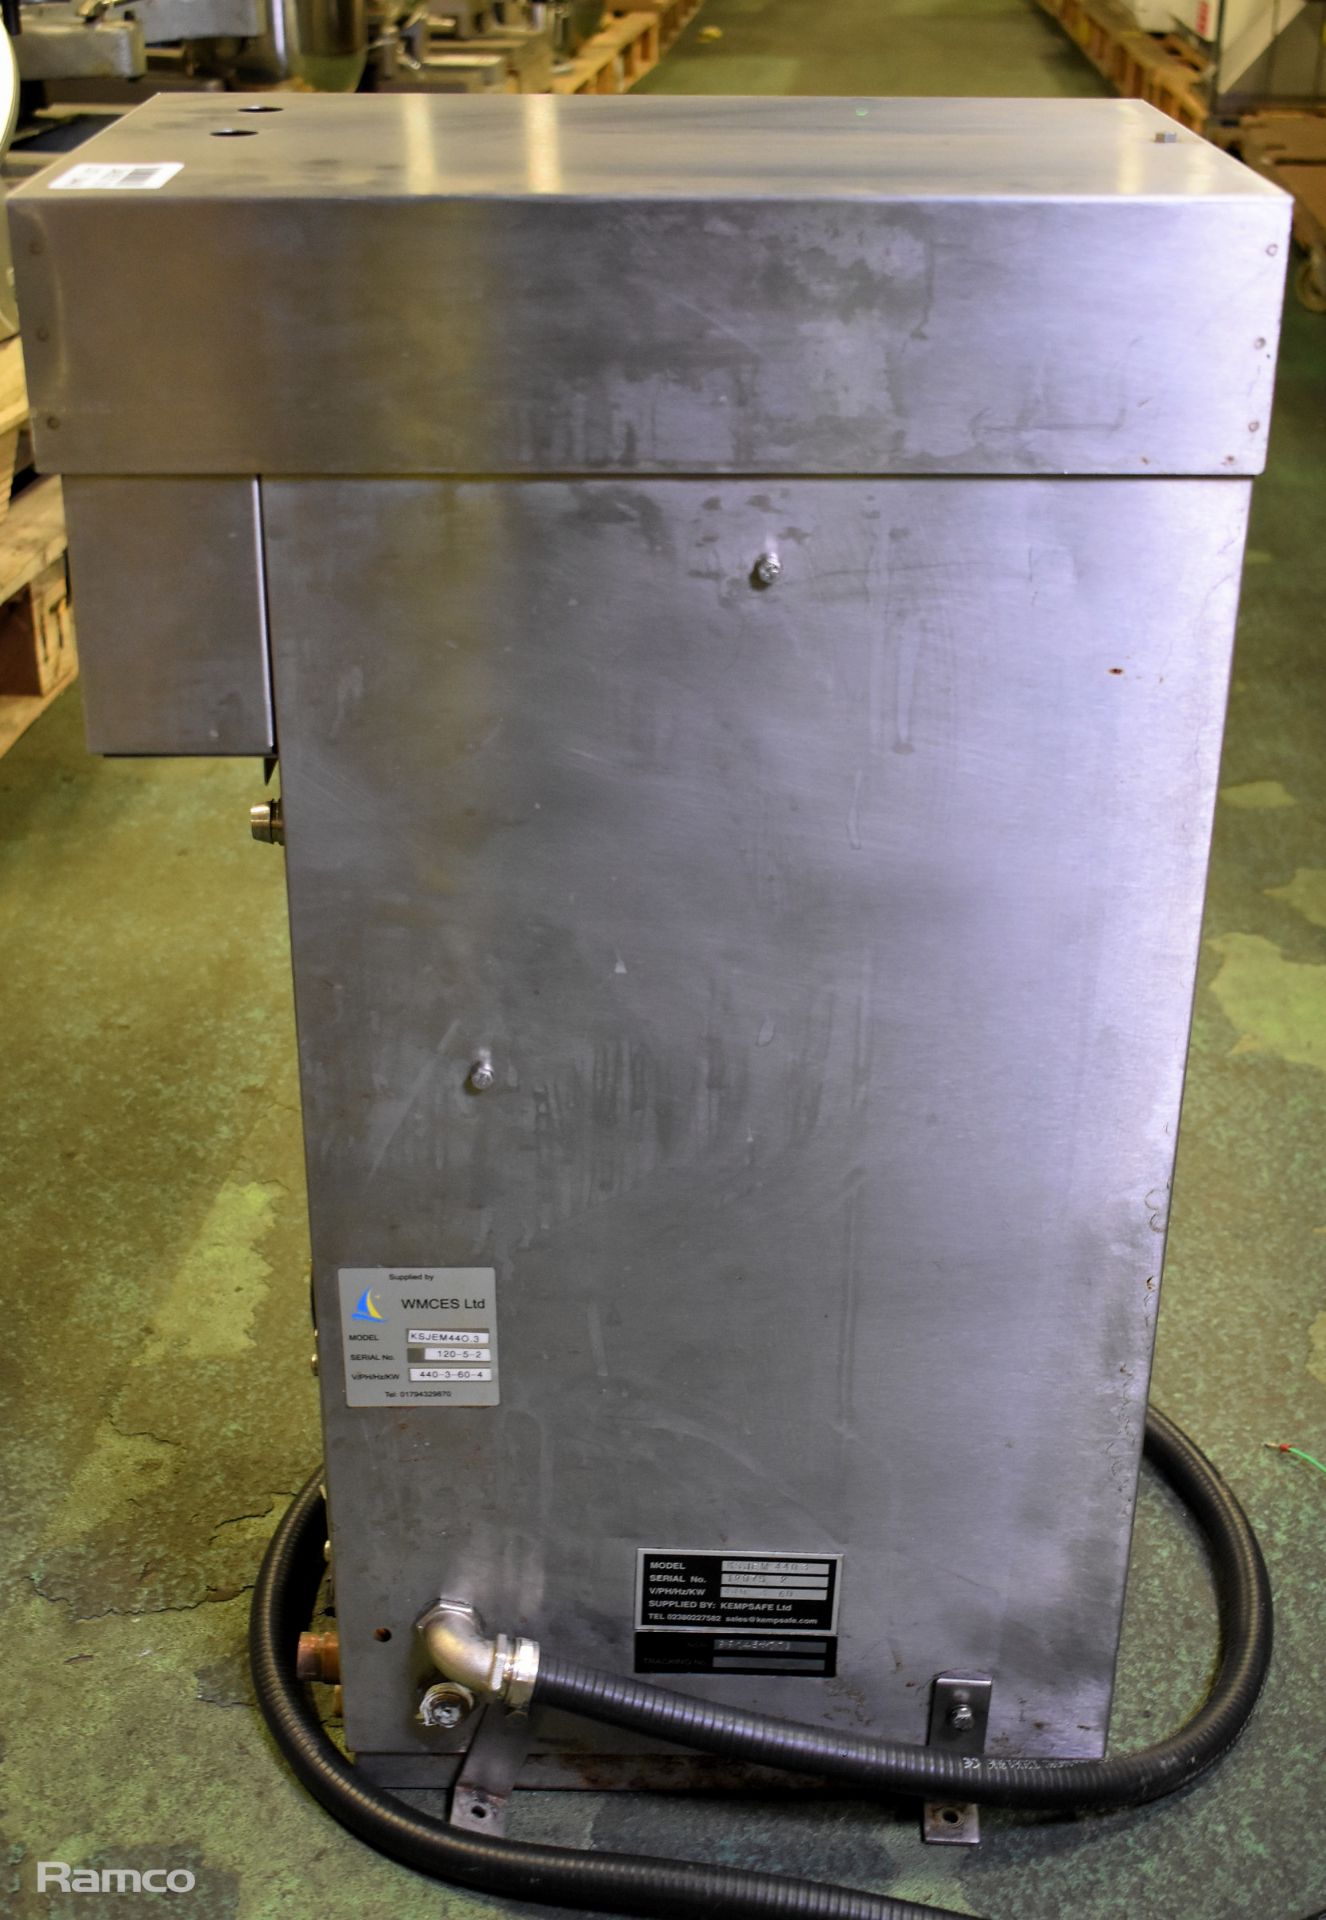 Kempsafe KSJEM440/3 stainless steel continuous water boiler/heater - Missing tap - 440V - 3ph - 60Hz - Image 3 of 5